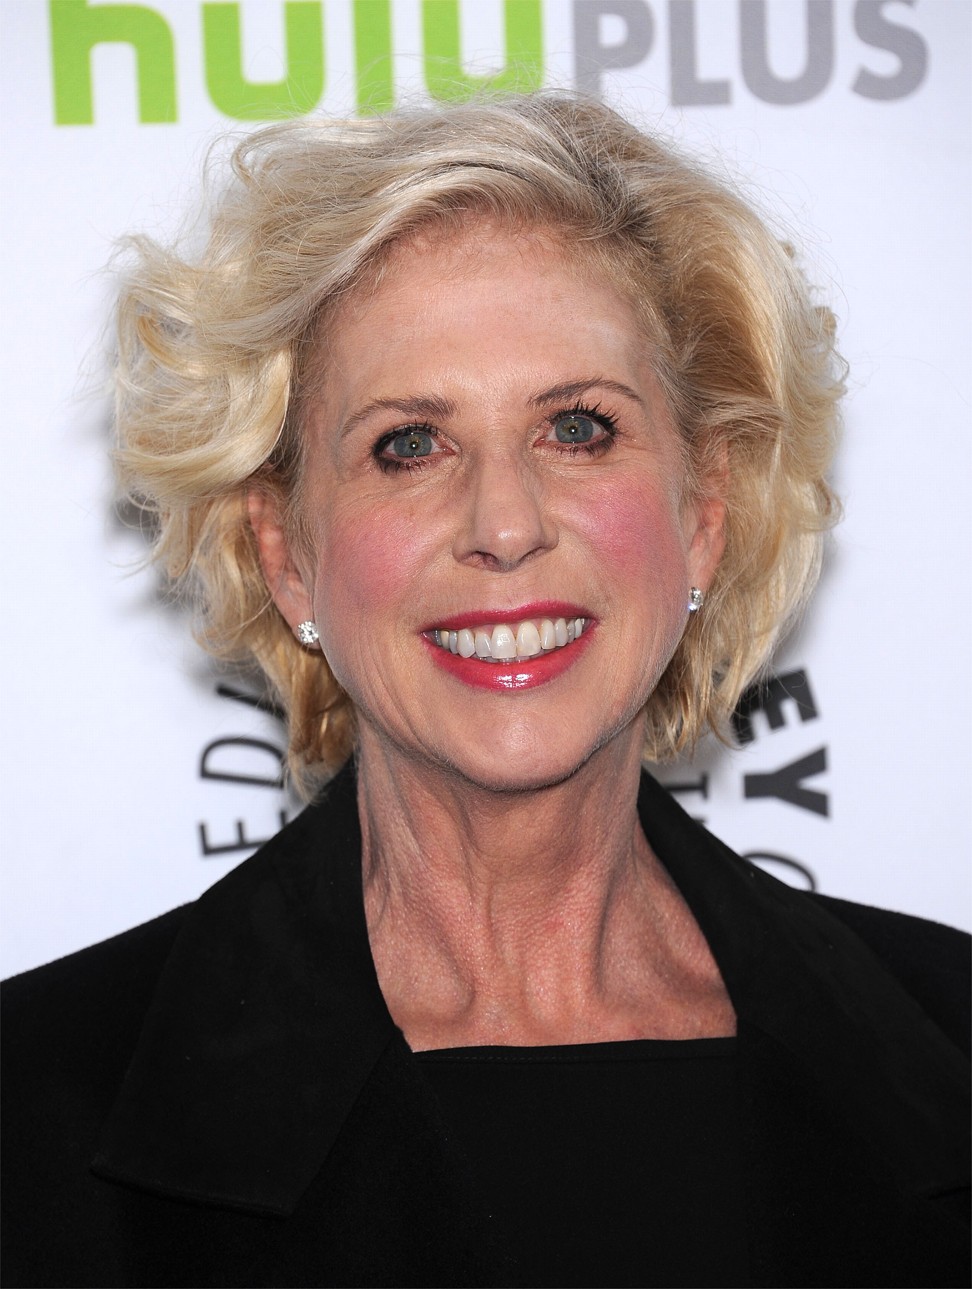 Callie Khouri wrote and is executive producer of Bloom.